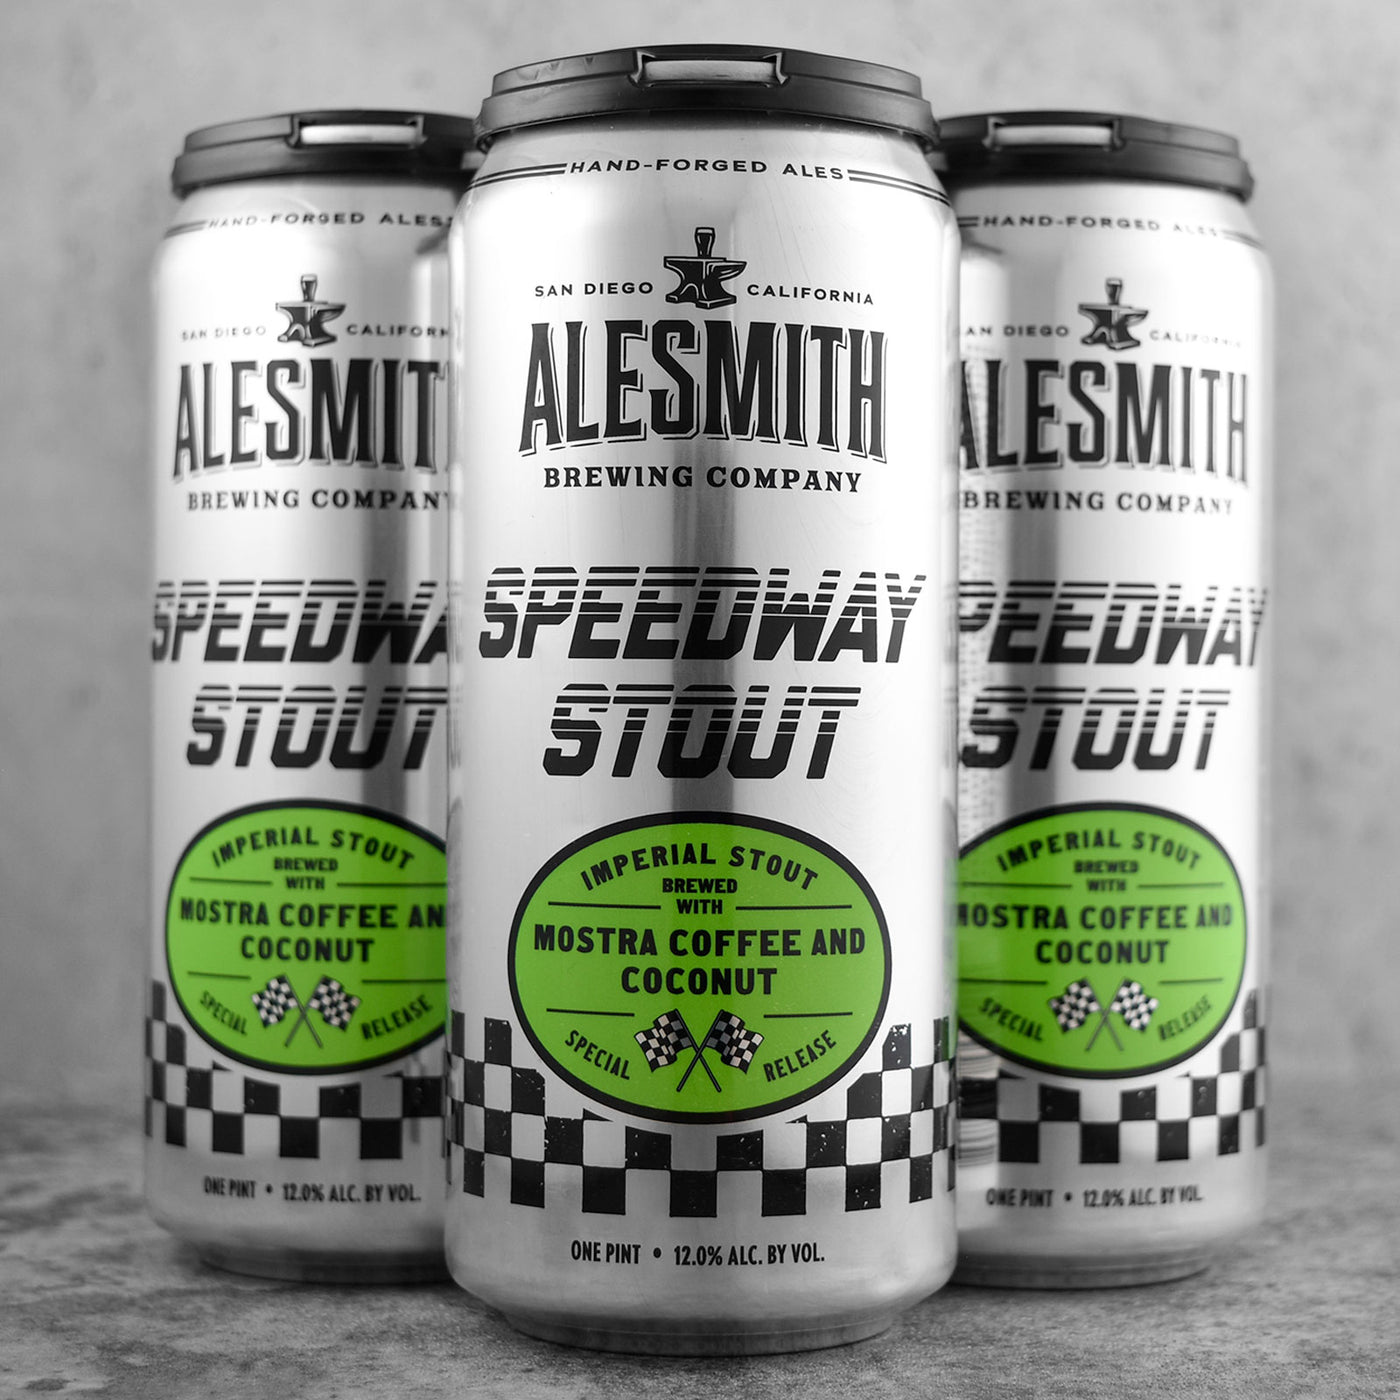 Alesmith Speedway Stout Mostra Coffee and Coconut